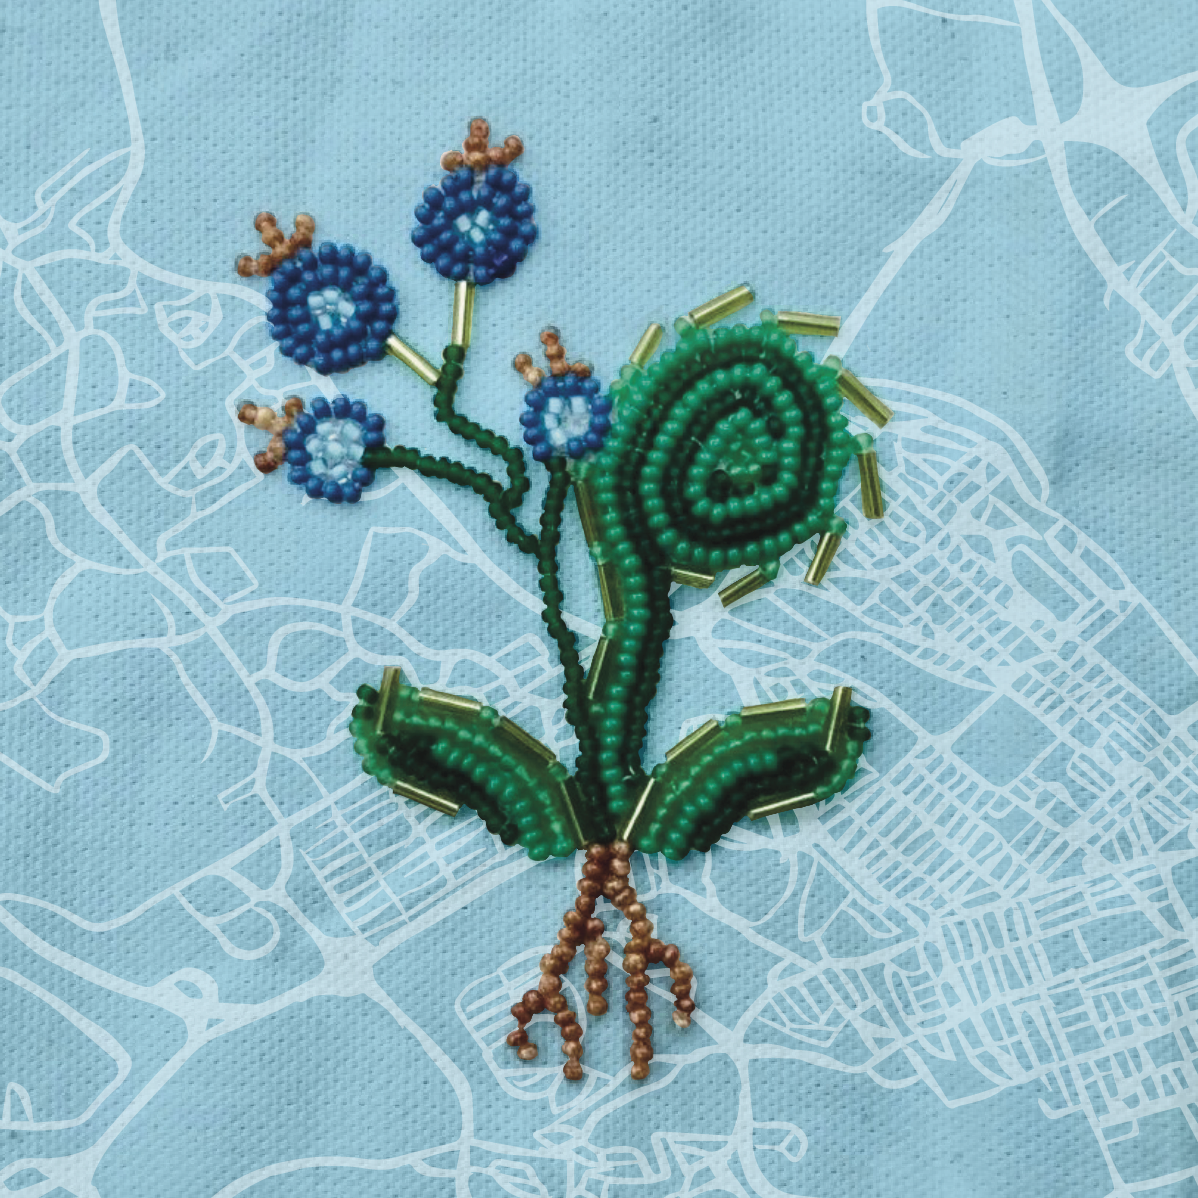 Photograph of green fiddlehead and blueberry design created with small glass beads in foreground. Light blue background with canvas texture and white, low-opacity graphic linework of Halifax city street grid.